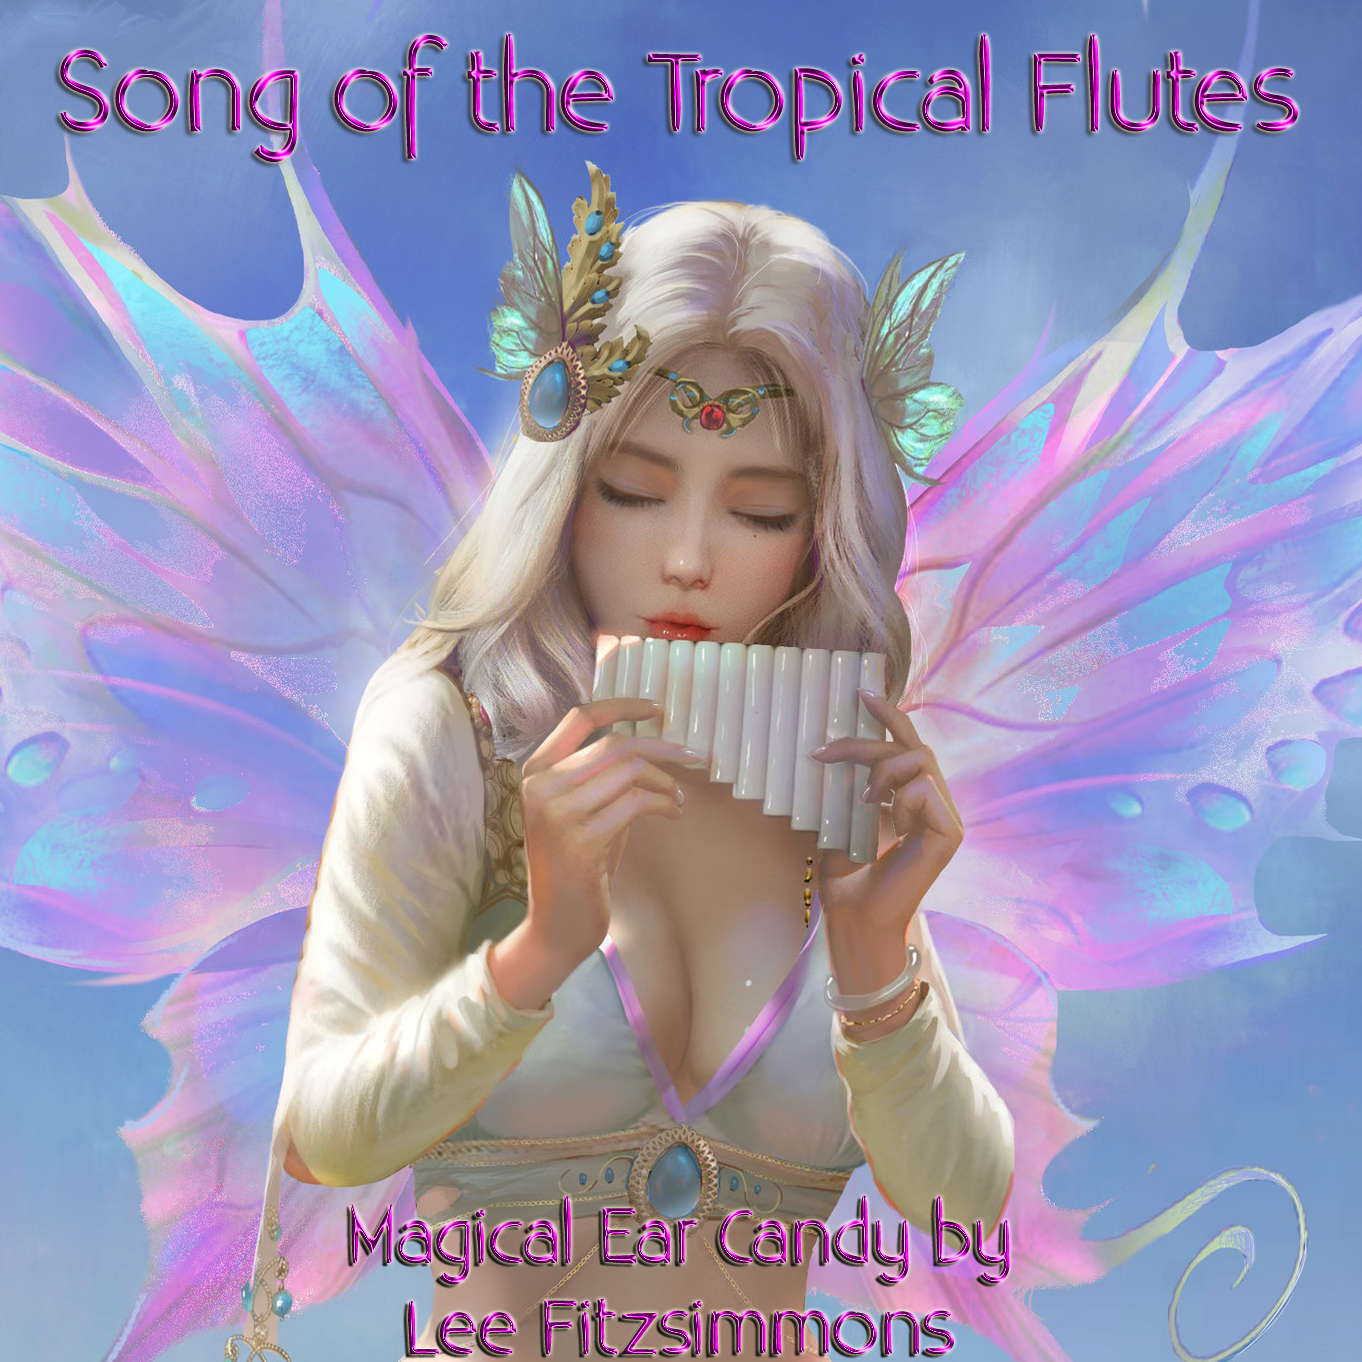 Song of the Tropical Flutes